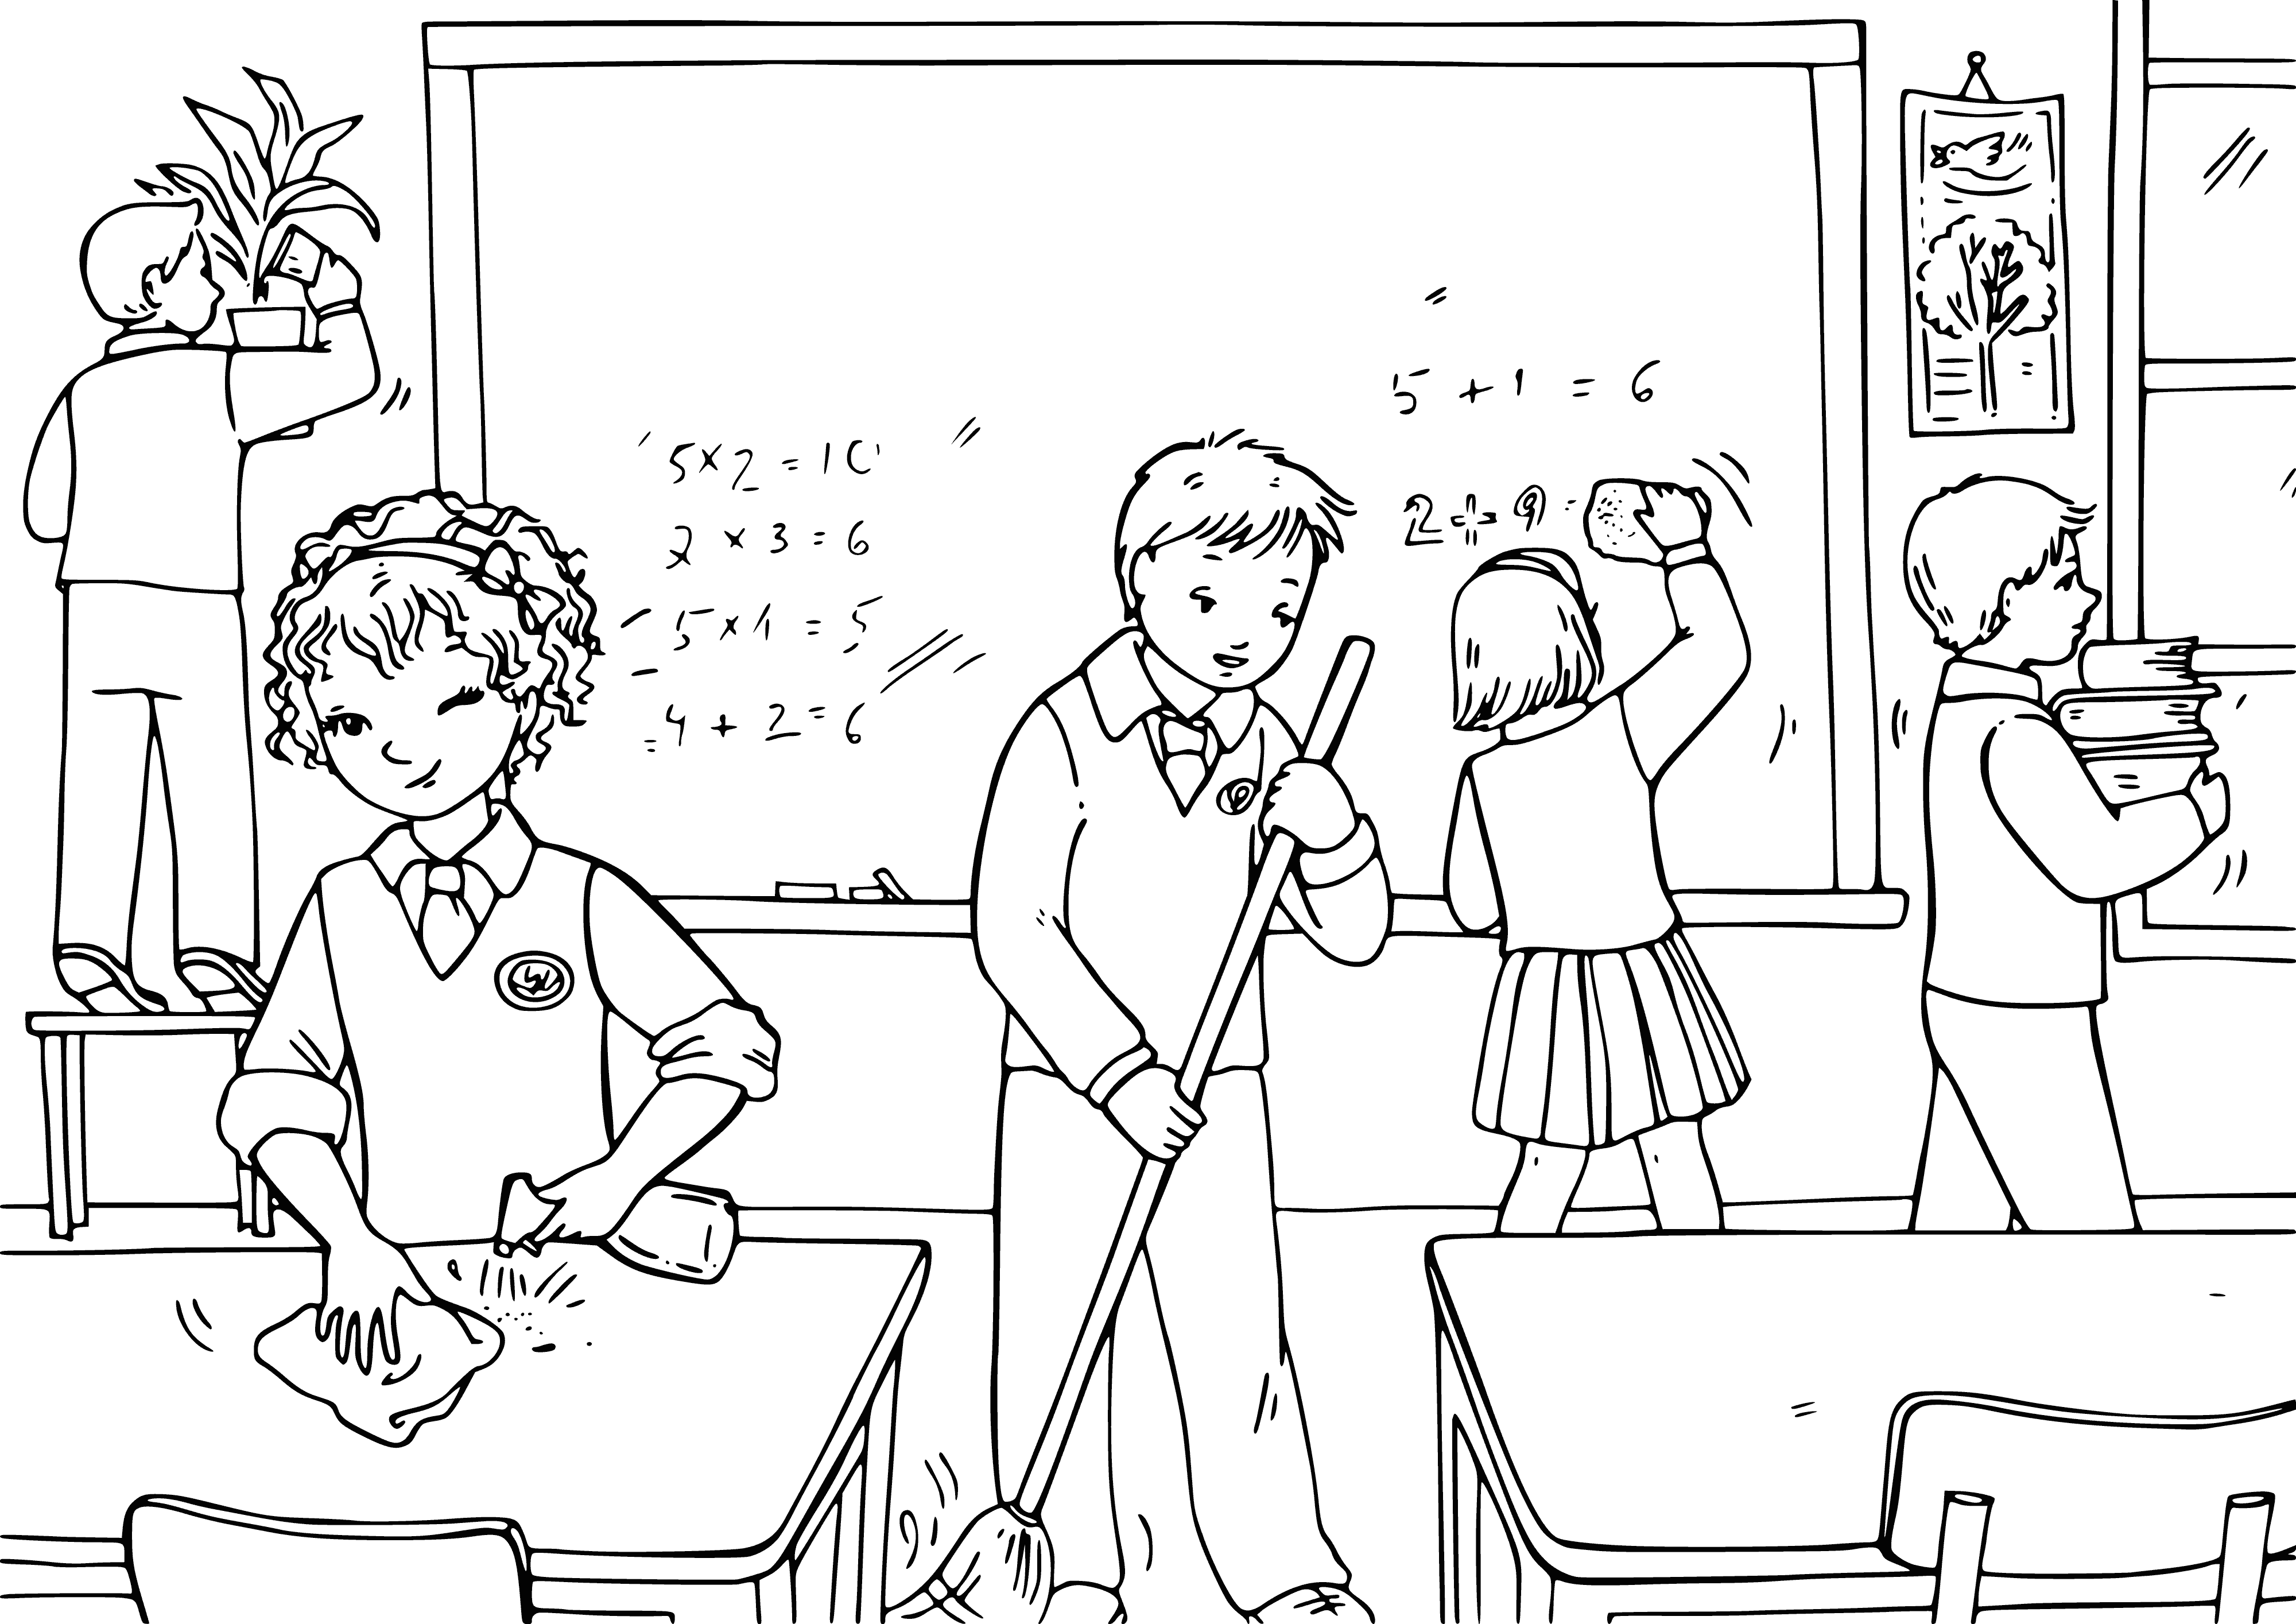 Cleaning in the classroom coloring page